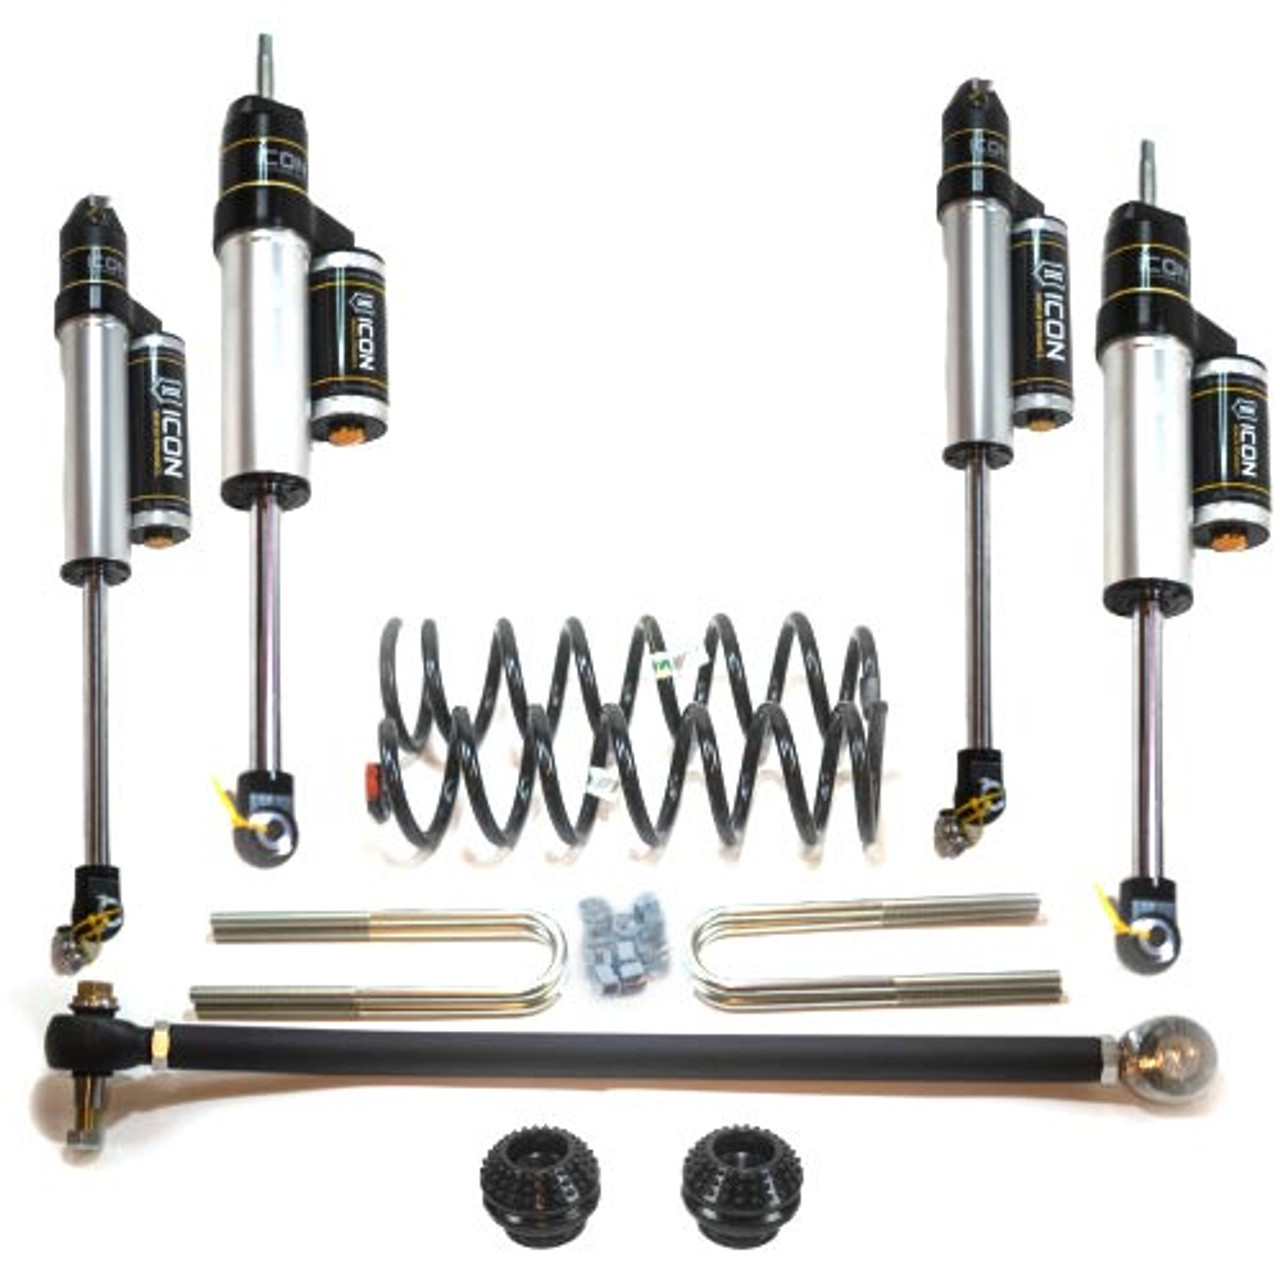 NO LIMIT FABRICATION REVERSE LEVEL KIT WITH 2" SHOCKS 2017-2021 FORD F-250/350 4WD (12-BOLT/3.5" AXLE) (NLFNLRLK173520)